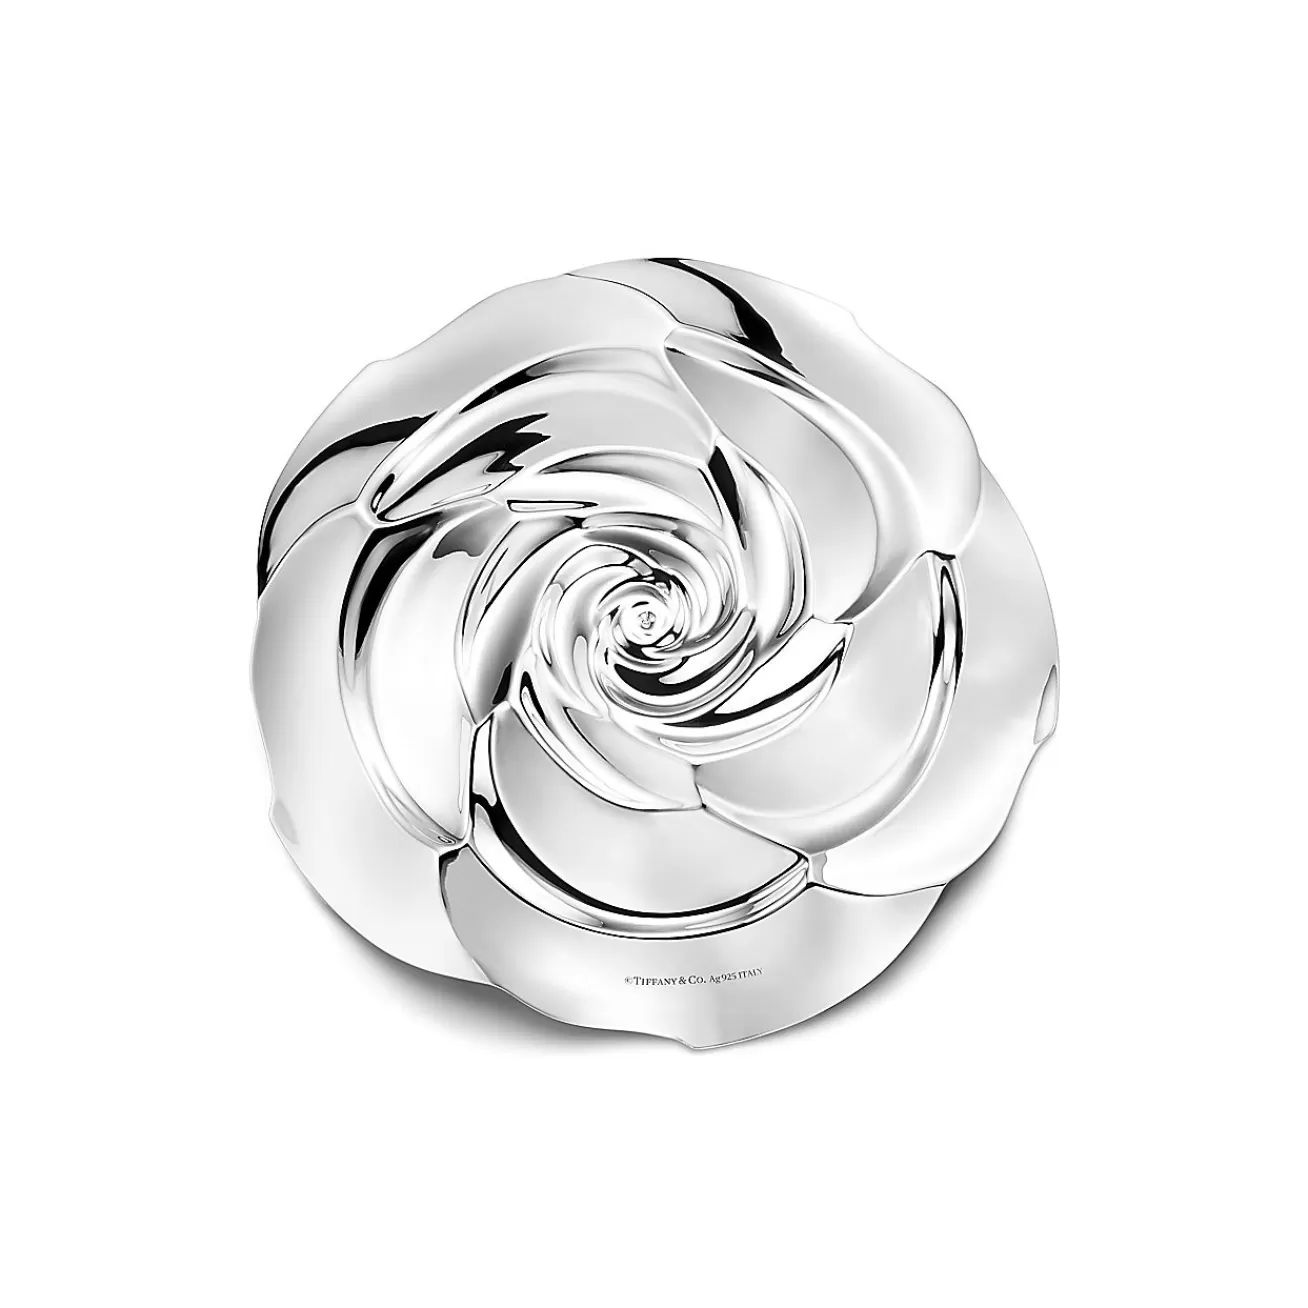 Tiffany & Co. Tiffany Home Essentials Rose Vide Poche in Sterling Silver | ^ The Home | Housewarming Gifts